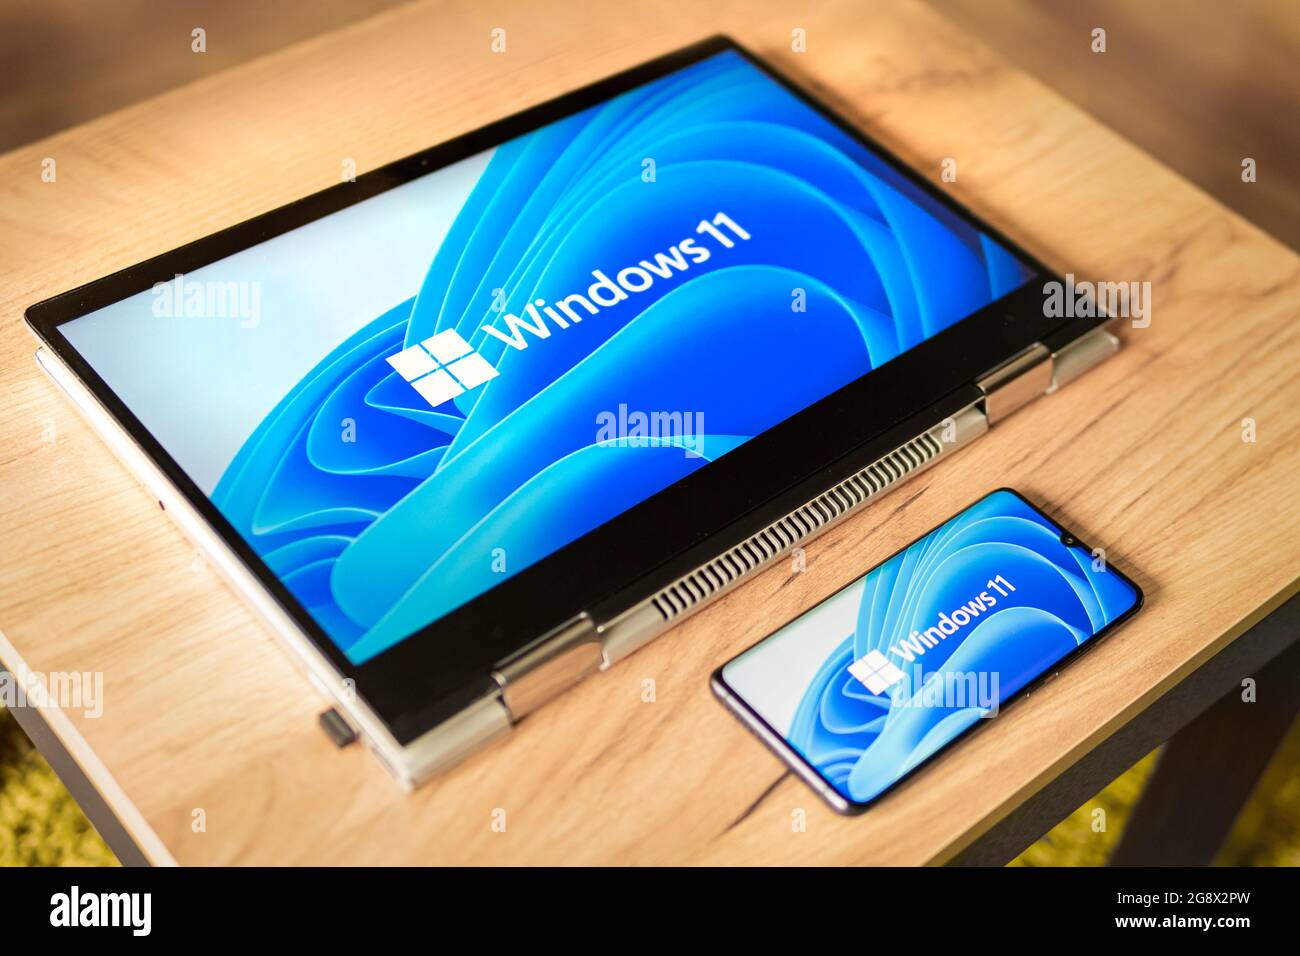 June 23, 2021. Barnaul, Russia. Windows 11 logo on the screens of a transformer laptop and a modern smartphone Stock Photo